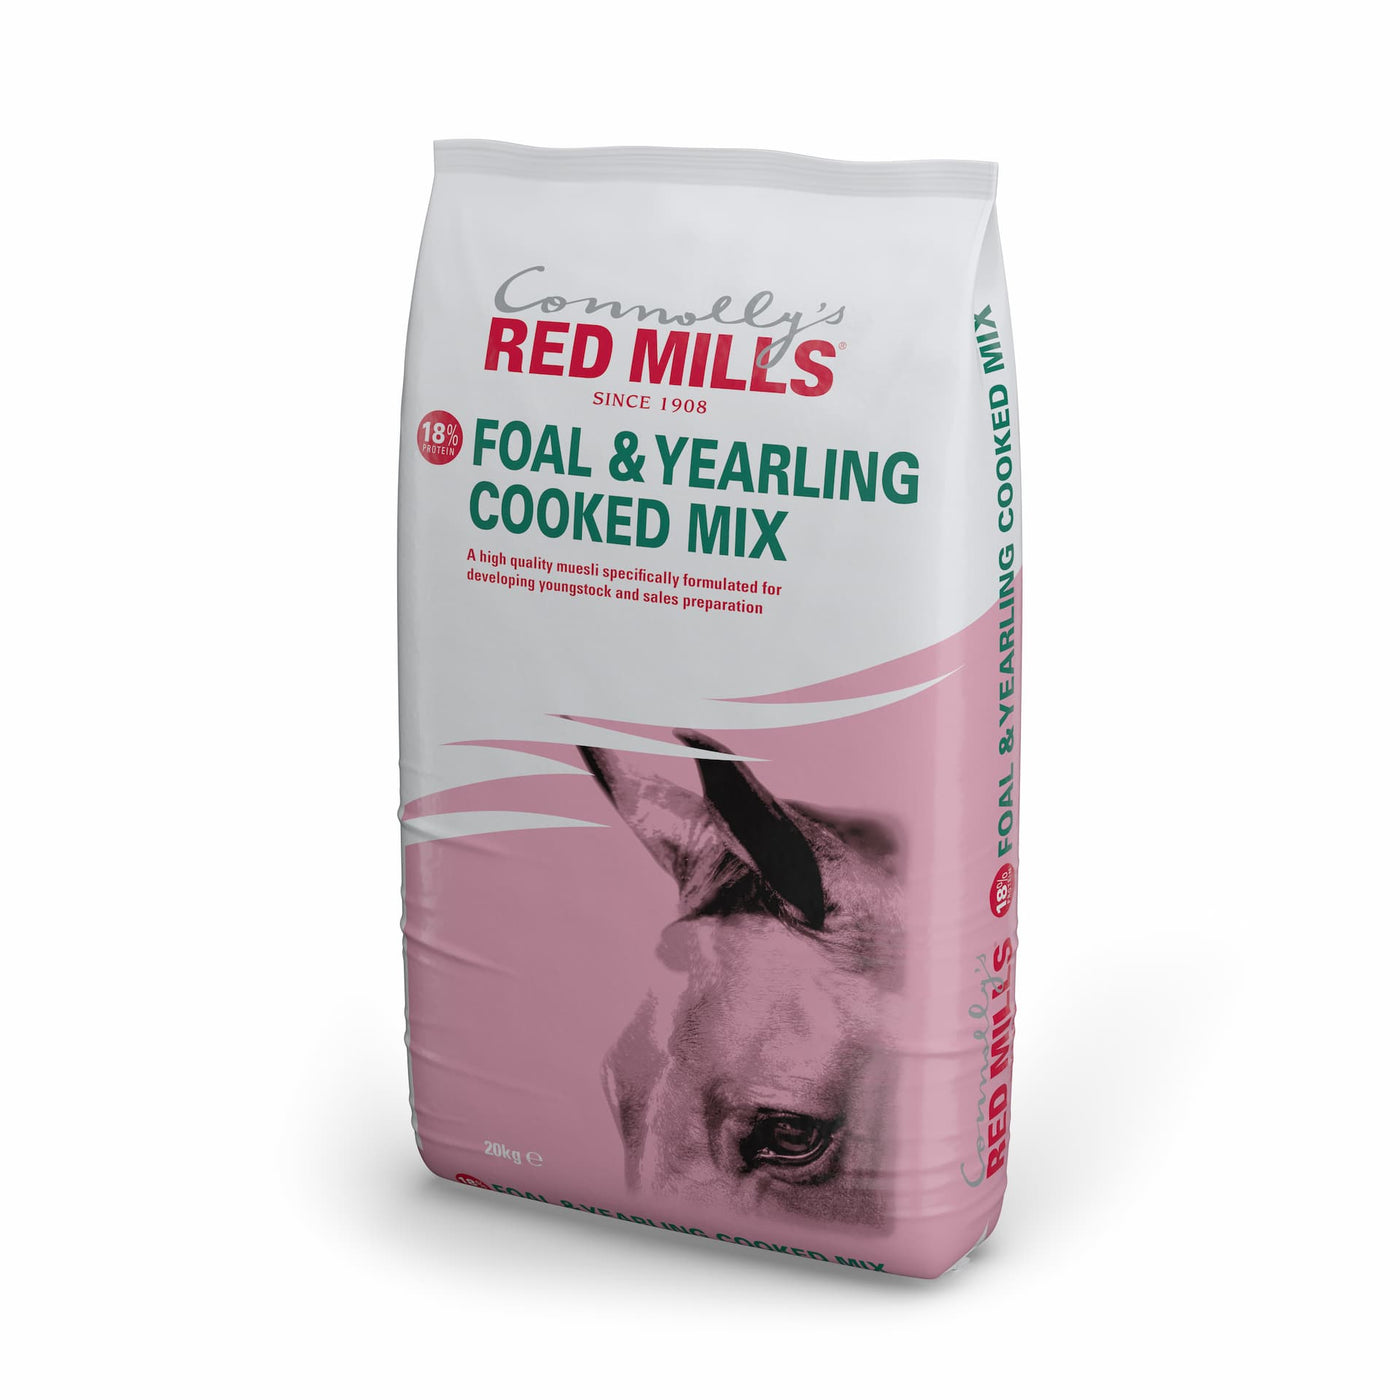 Red Mills Foal & Yearling Cooked Mix